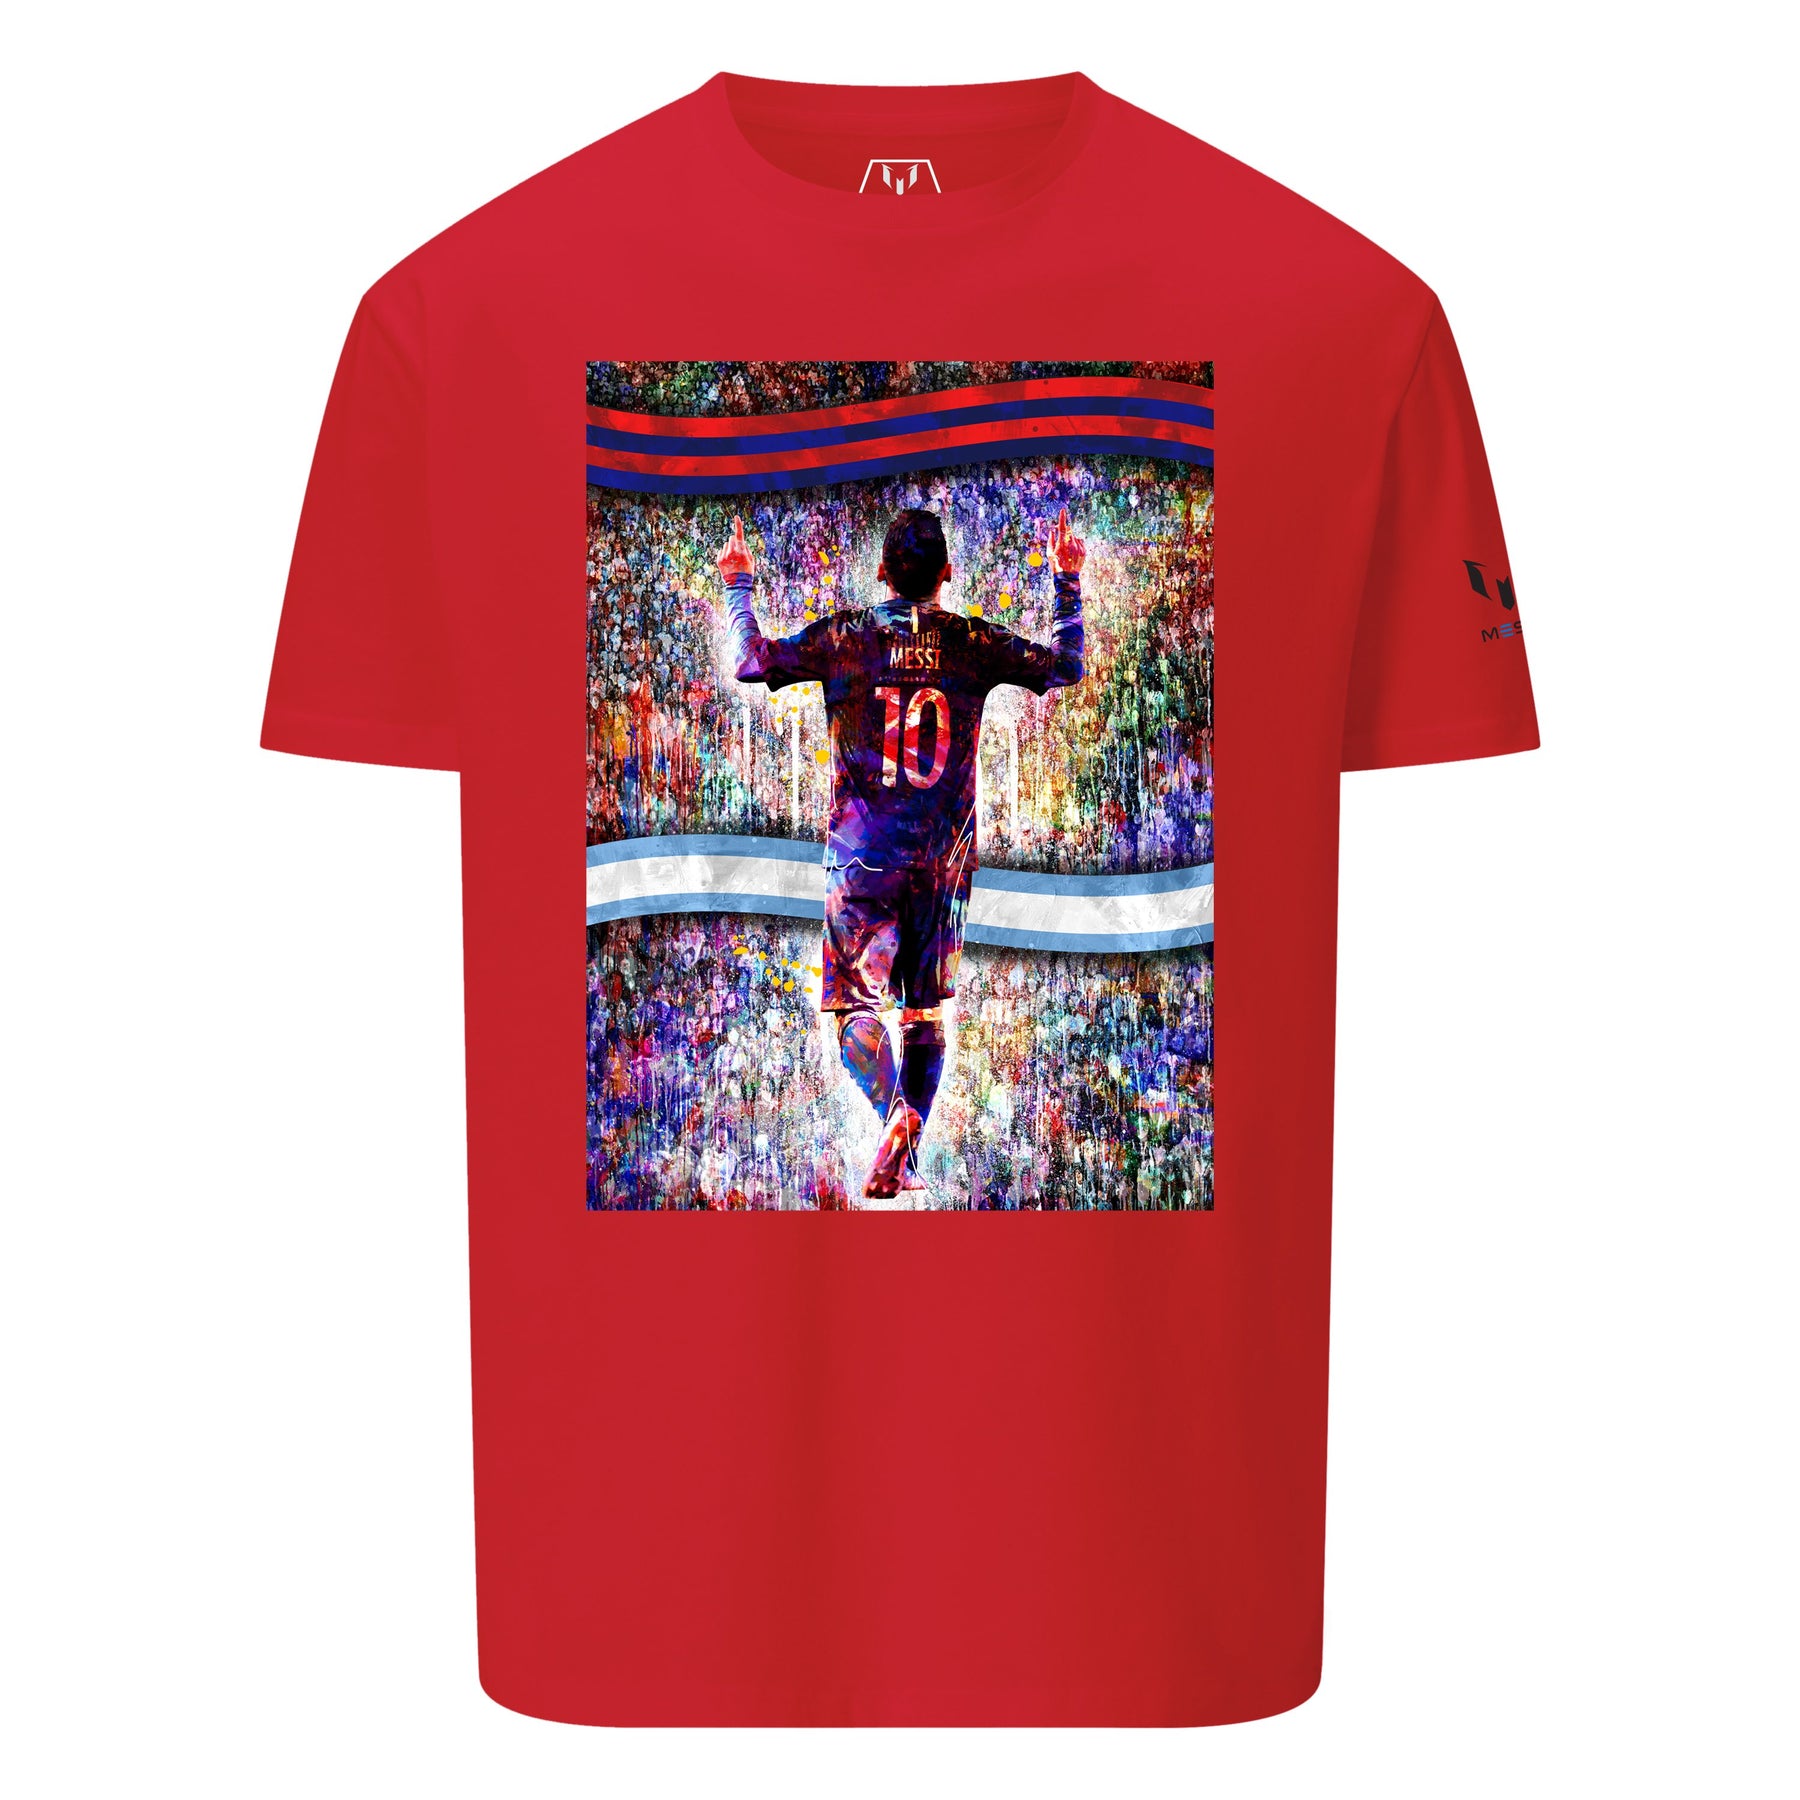 Shop Graphic T-Shirts at The Messi Store